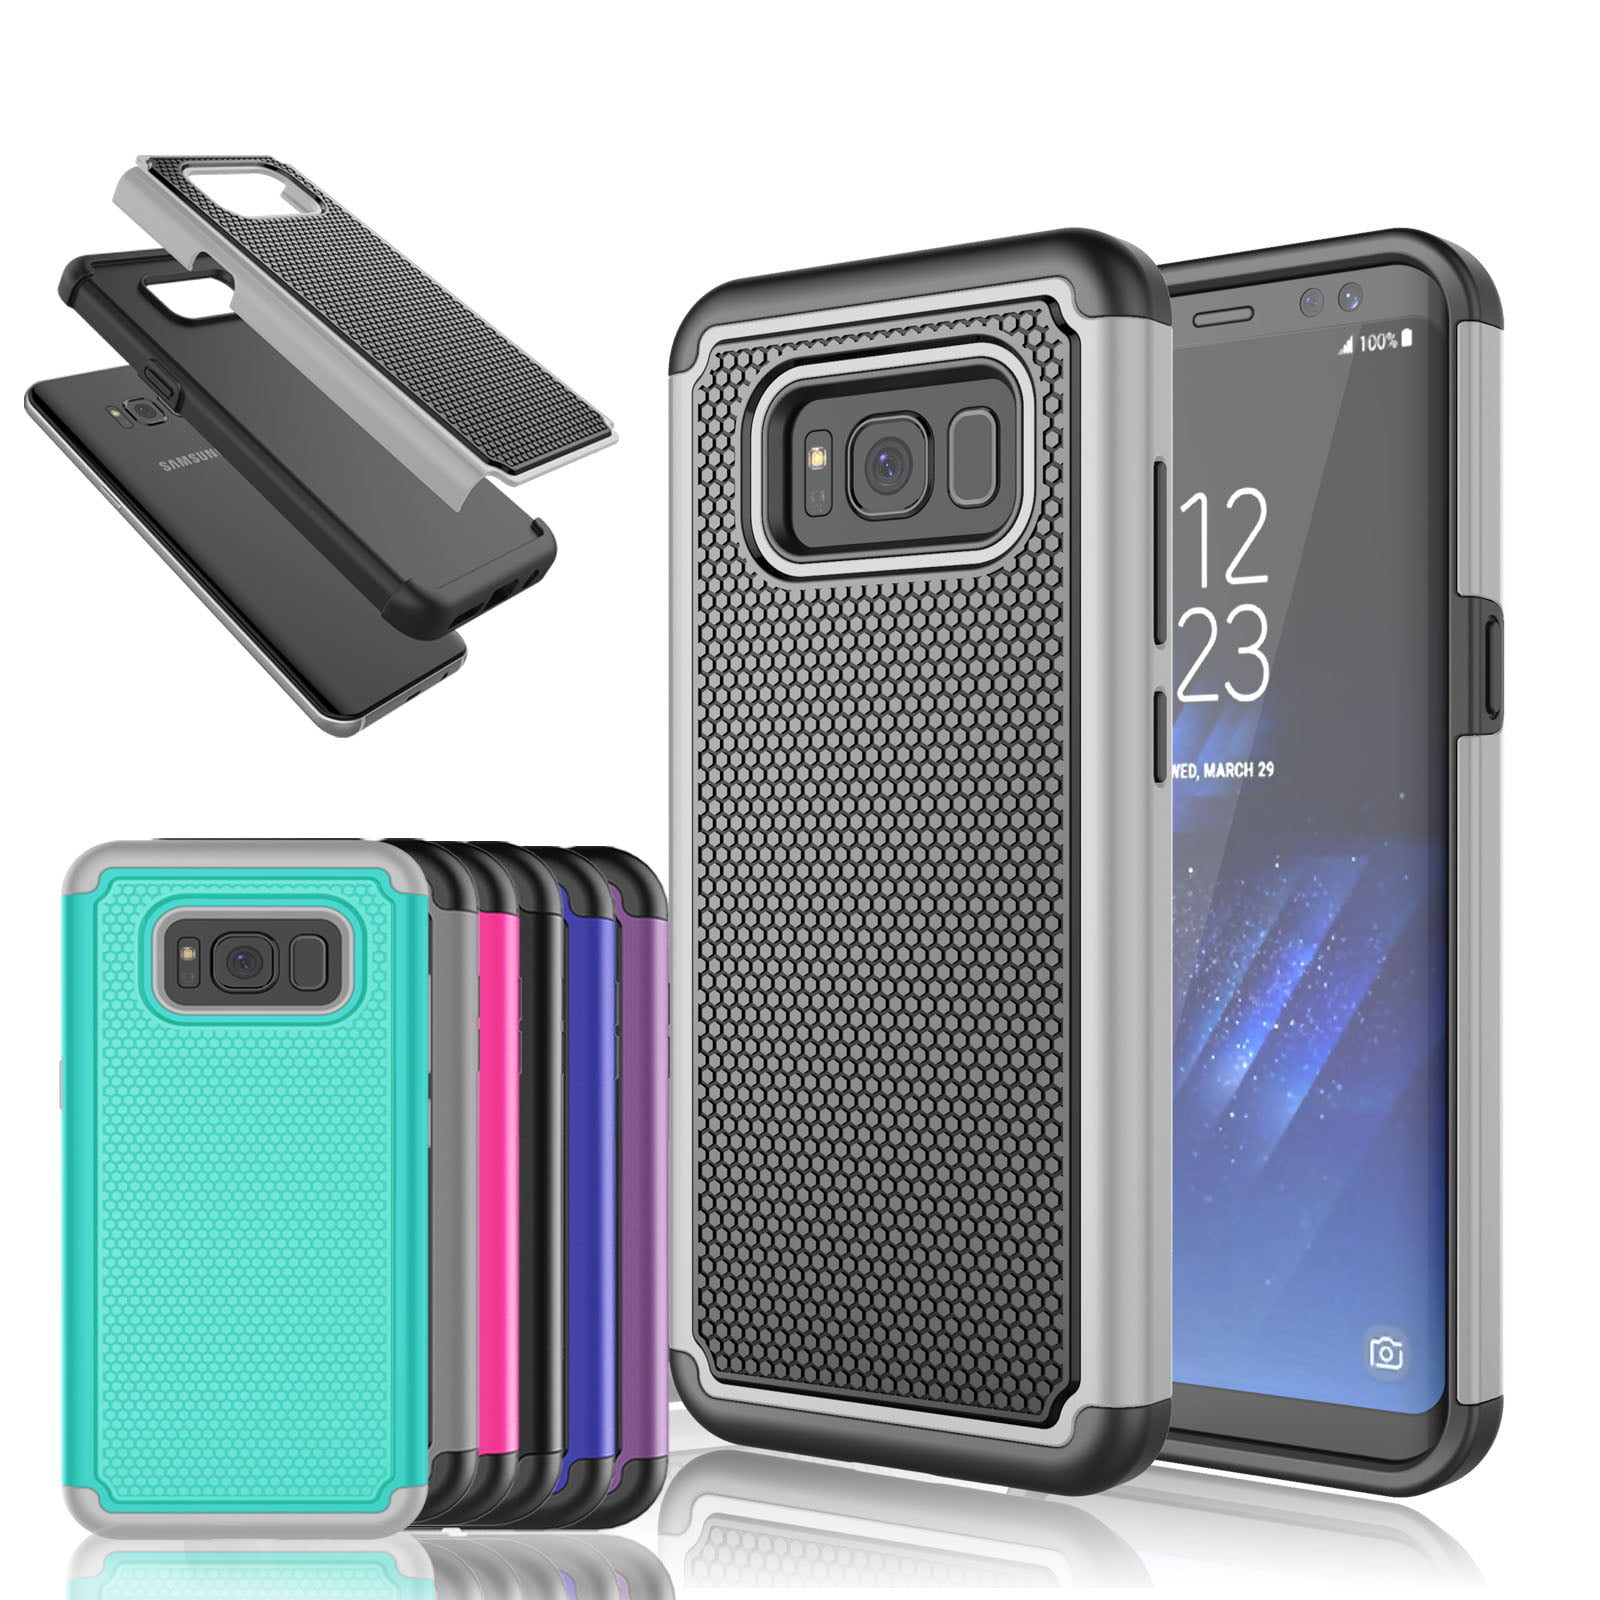 Galaxy S6 Edge Case Scratch Absorbing Hybrid Rubber Plastic Impact Defender Rugged Slim Hard Case Cover Shell for Samsung Galaxy S6 Edge S VI Edge G925 Shock Proof Jeylly 